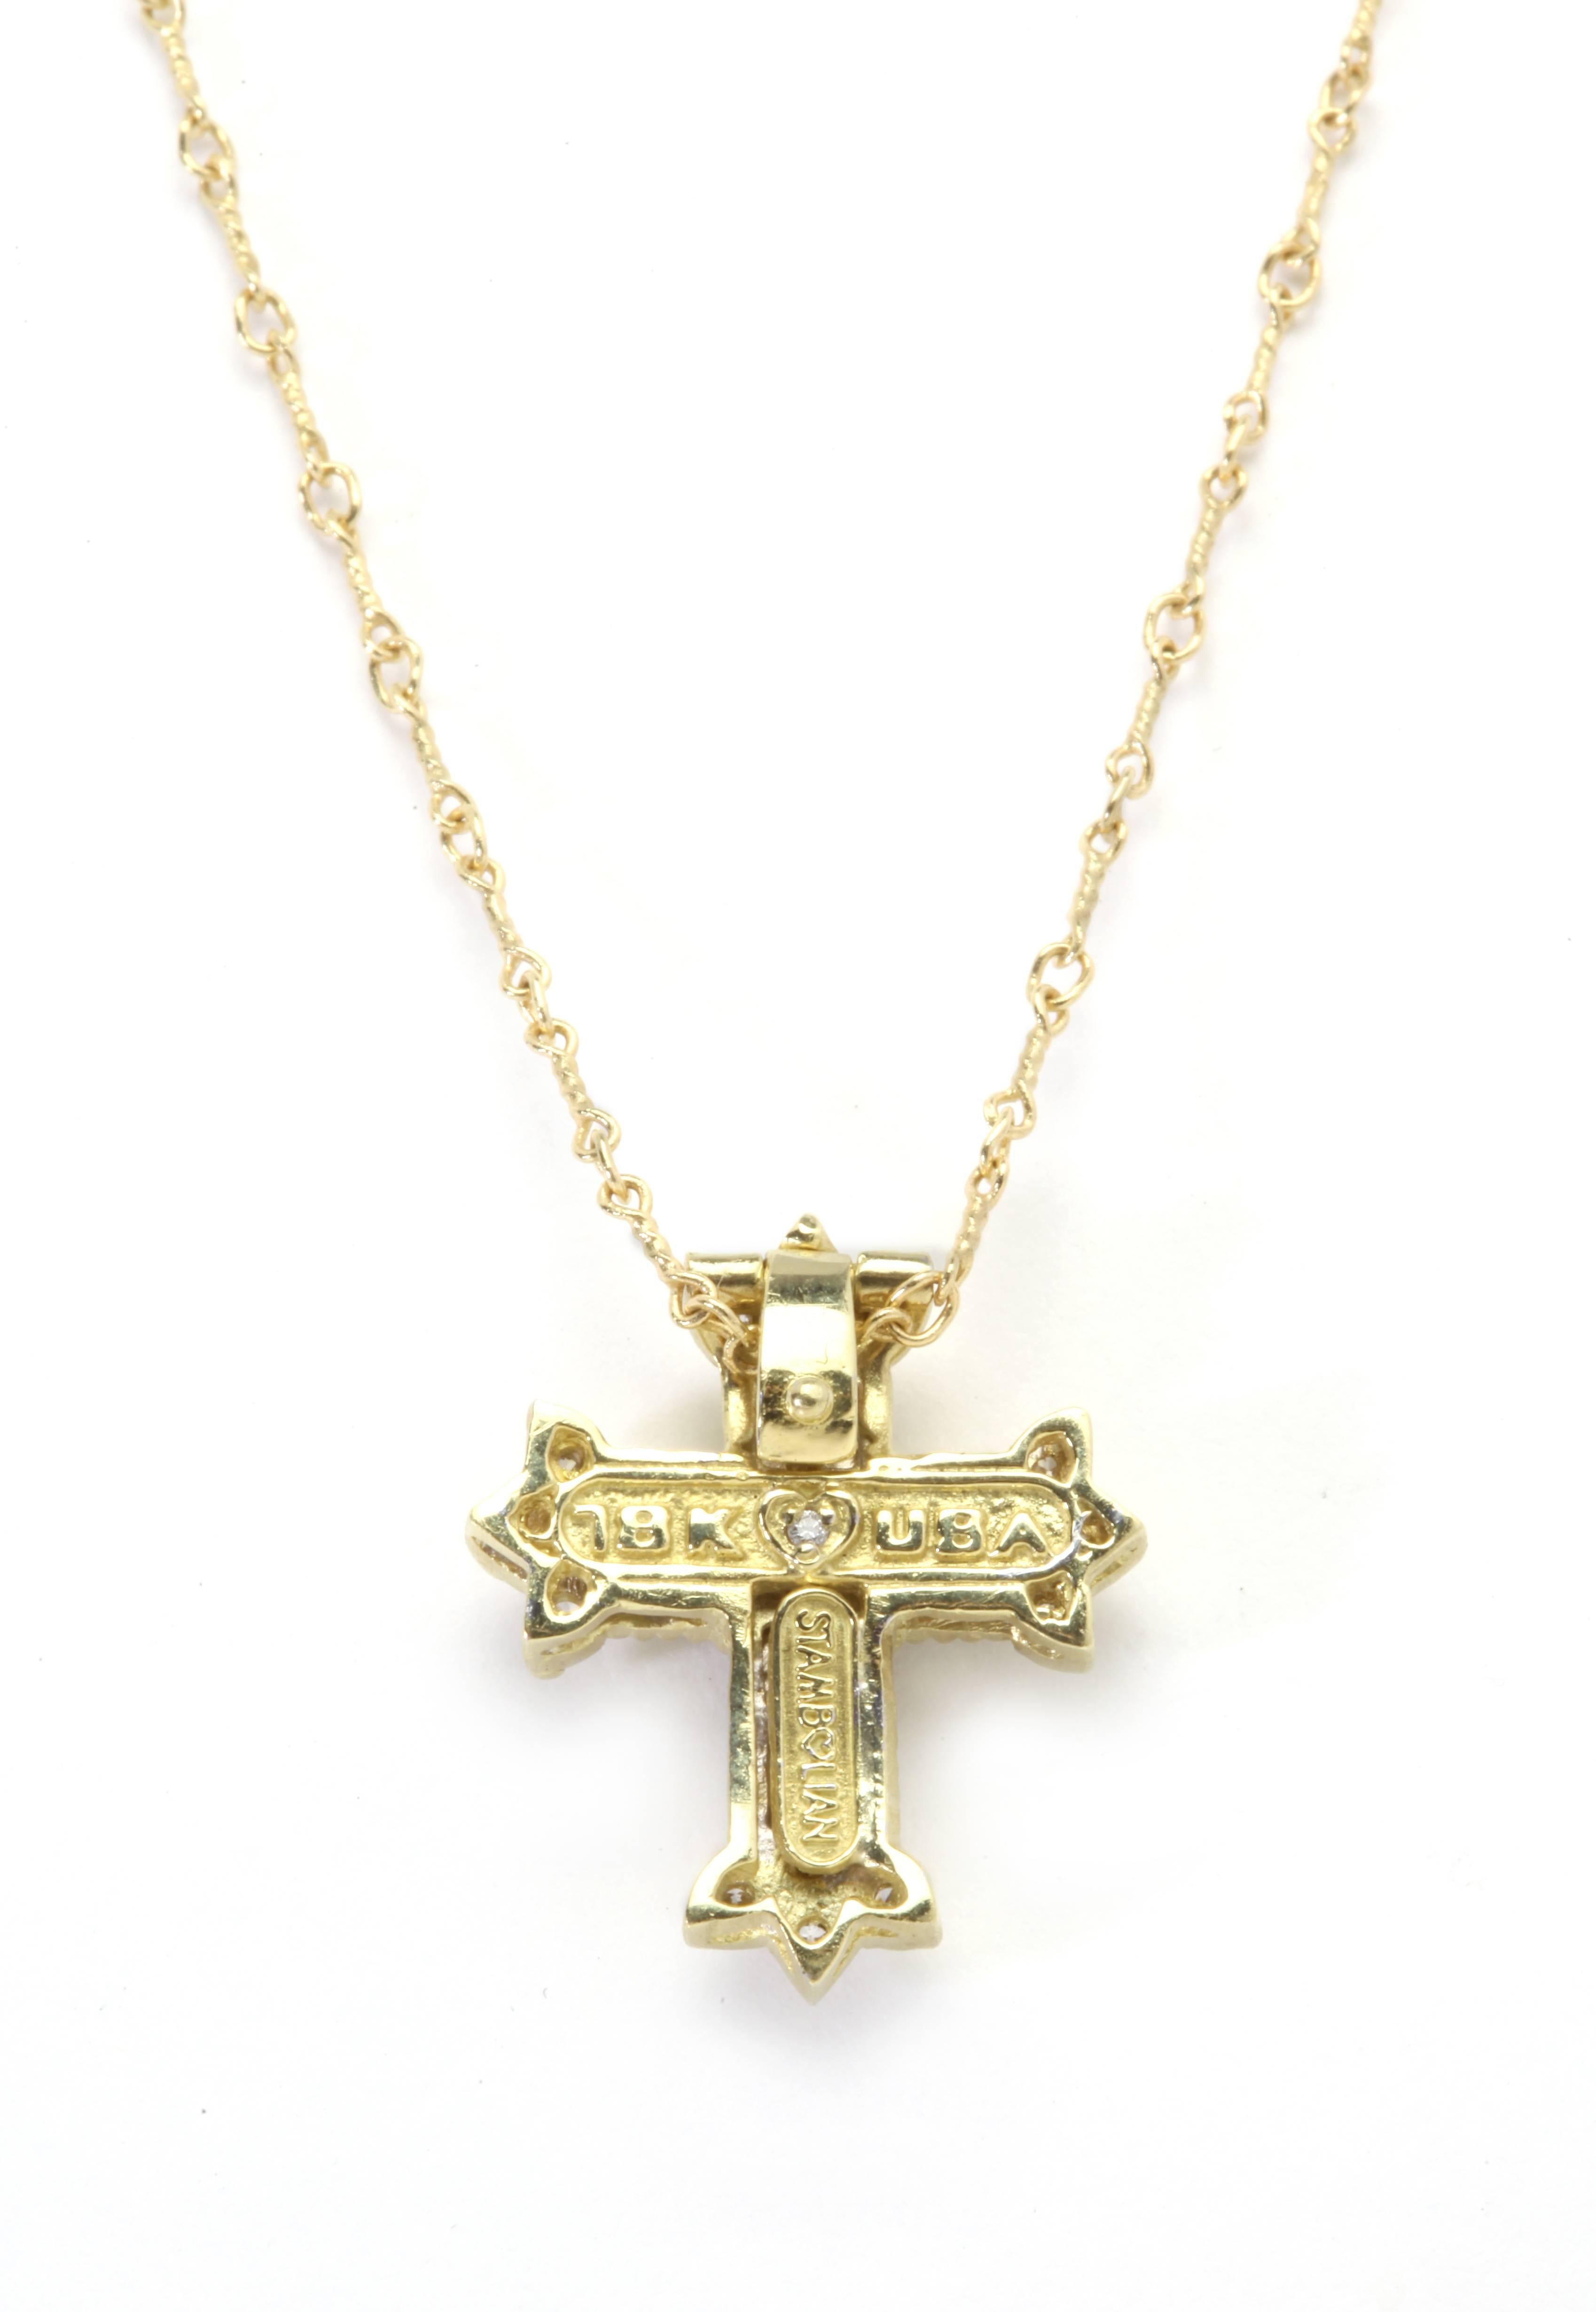 18k Gold Cross Necklace with  Diamonds 

0.67ct. G Color, VS Quality Diamonds 

Enhancer  0.80 inches length. 

 Chain is 16 Inches. Hand Made.  

Signed STAMBOLIAN with our Trademark 